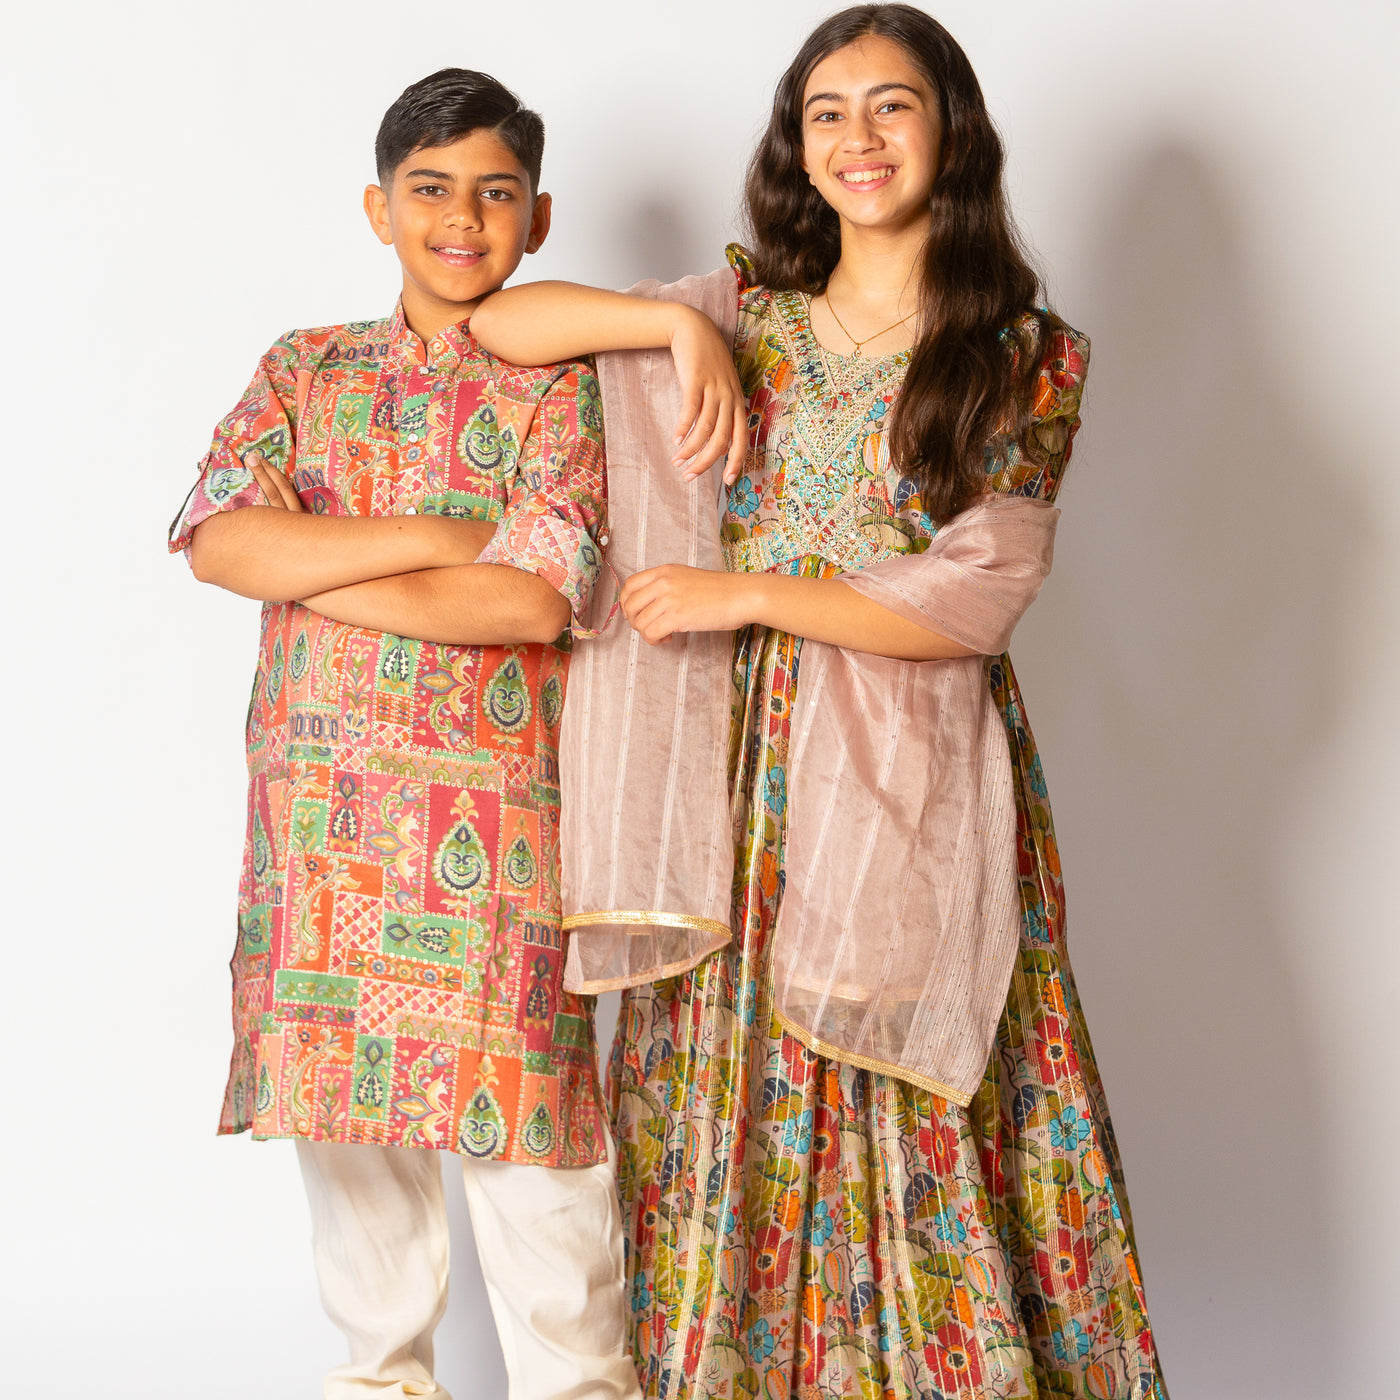 Sibling Coordinated Set - Floral Garden Gown for Girls and Multicolor Tile Print Kurta Pajama for Boys